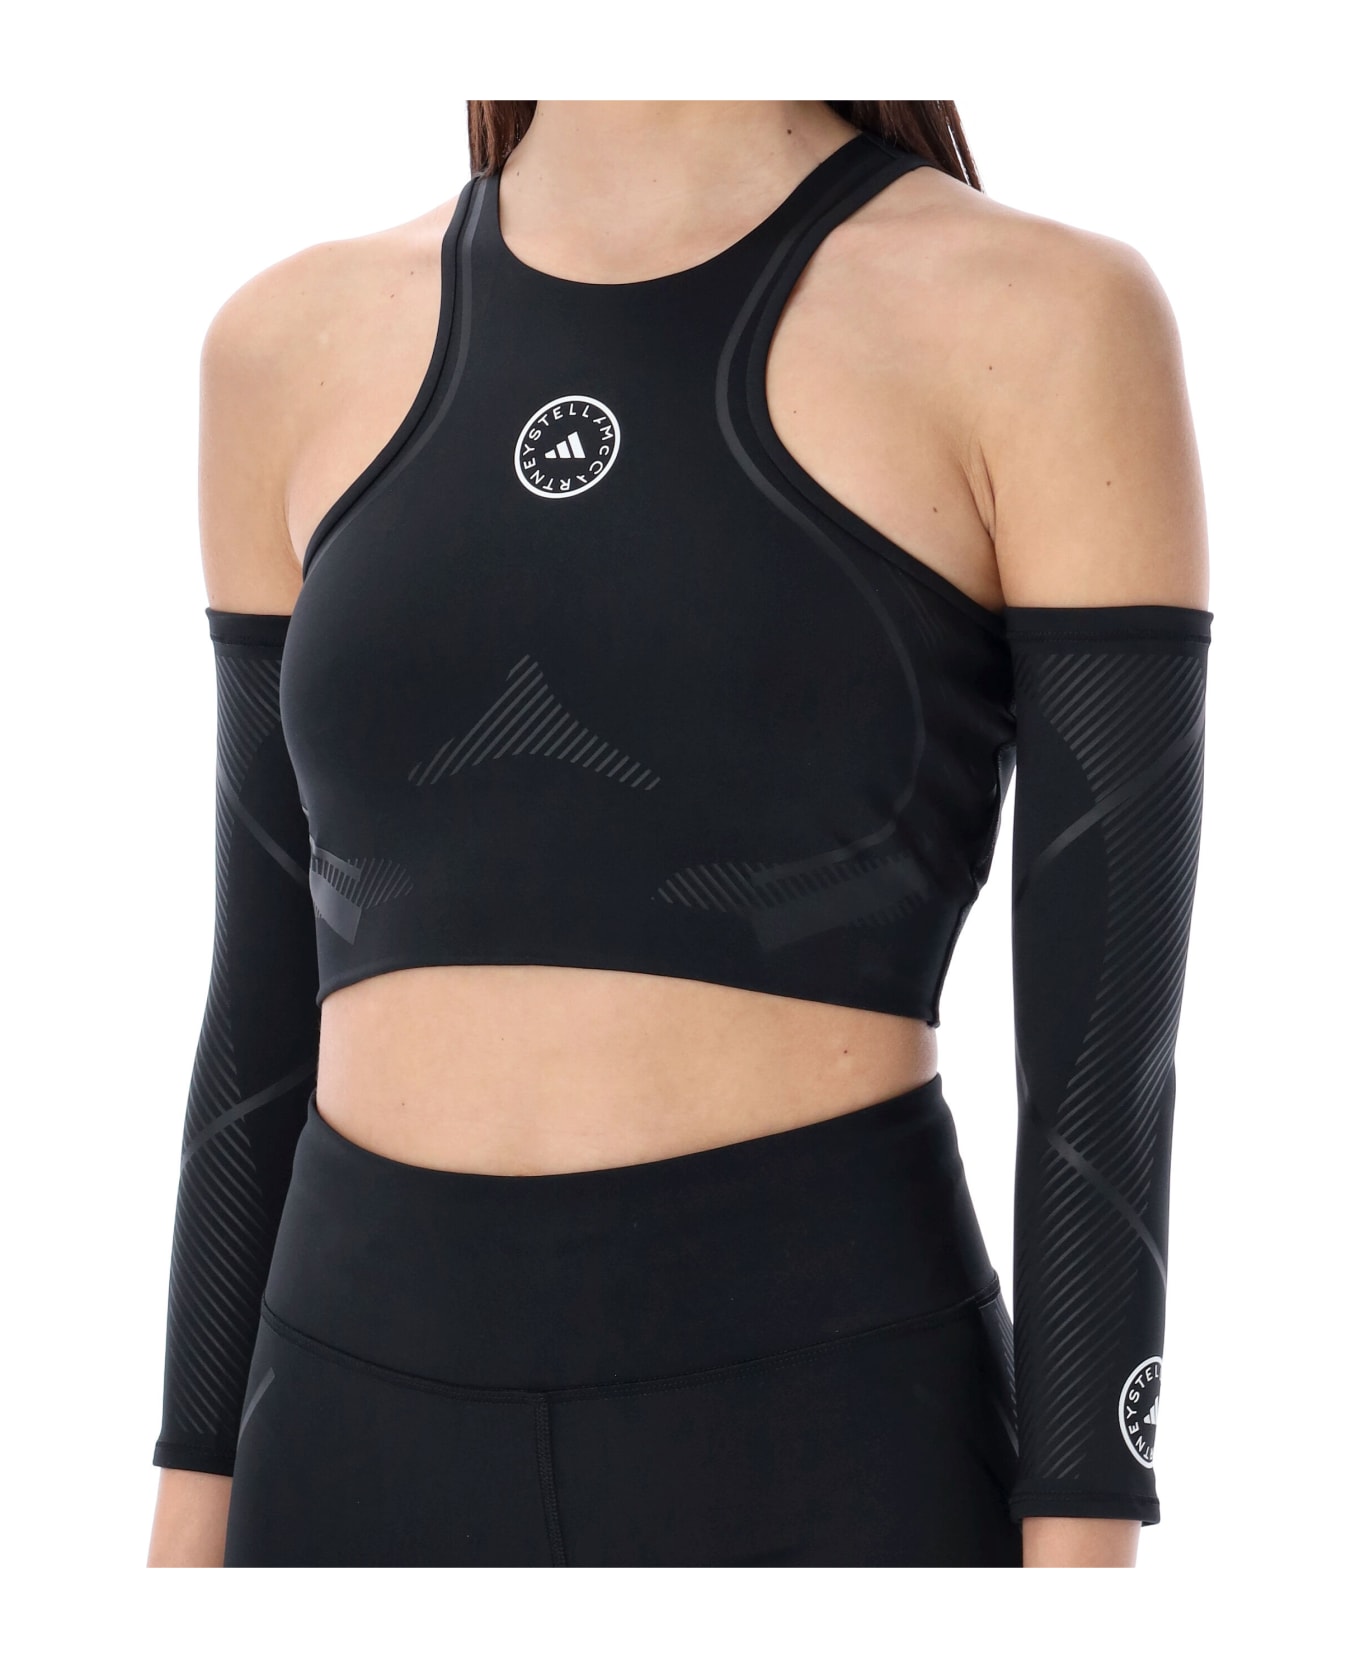 Adidas by Stella McCartney Truepace Running Crop Top With Arm Guards - Black トップス